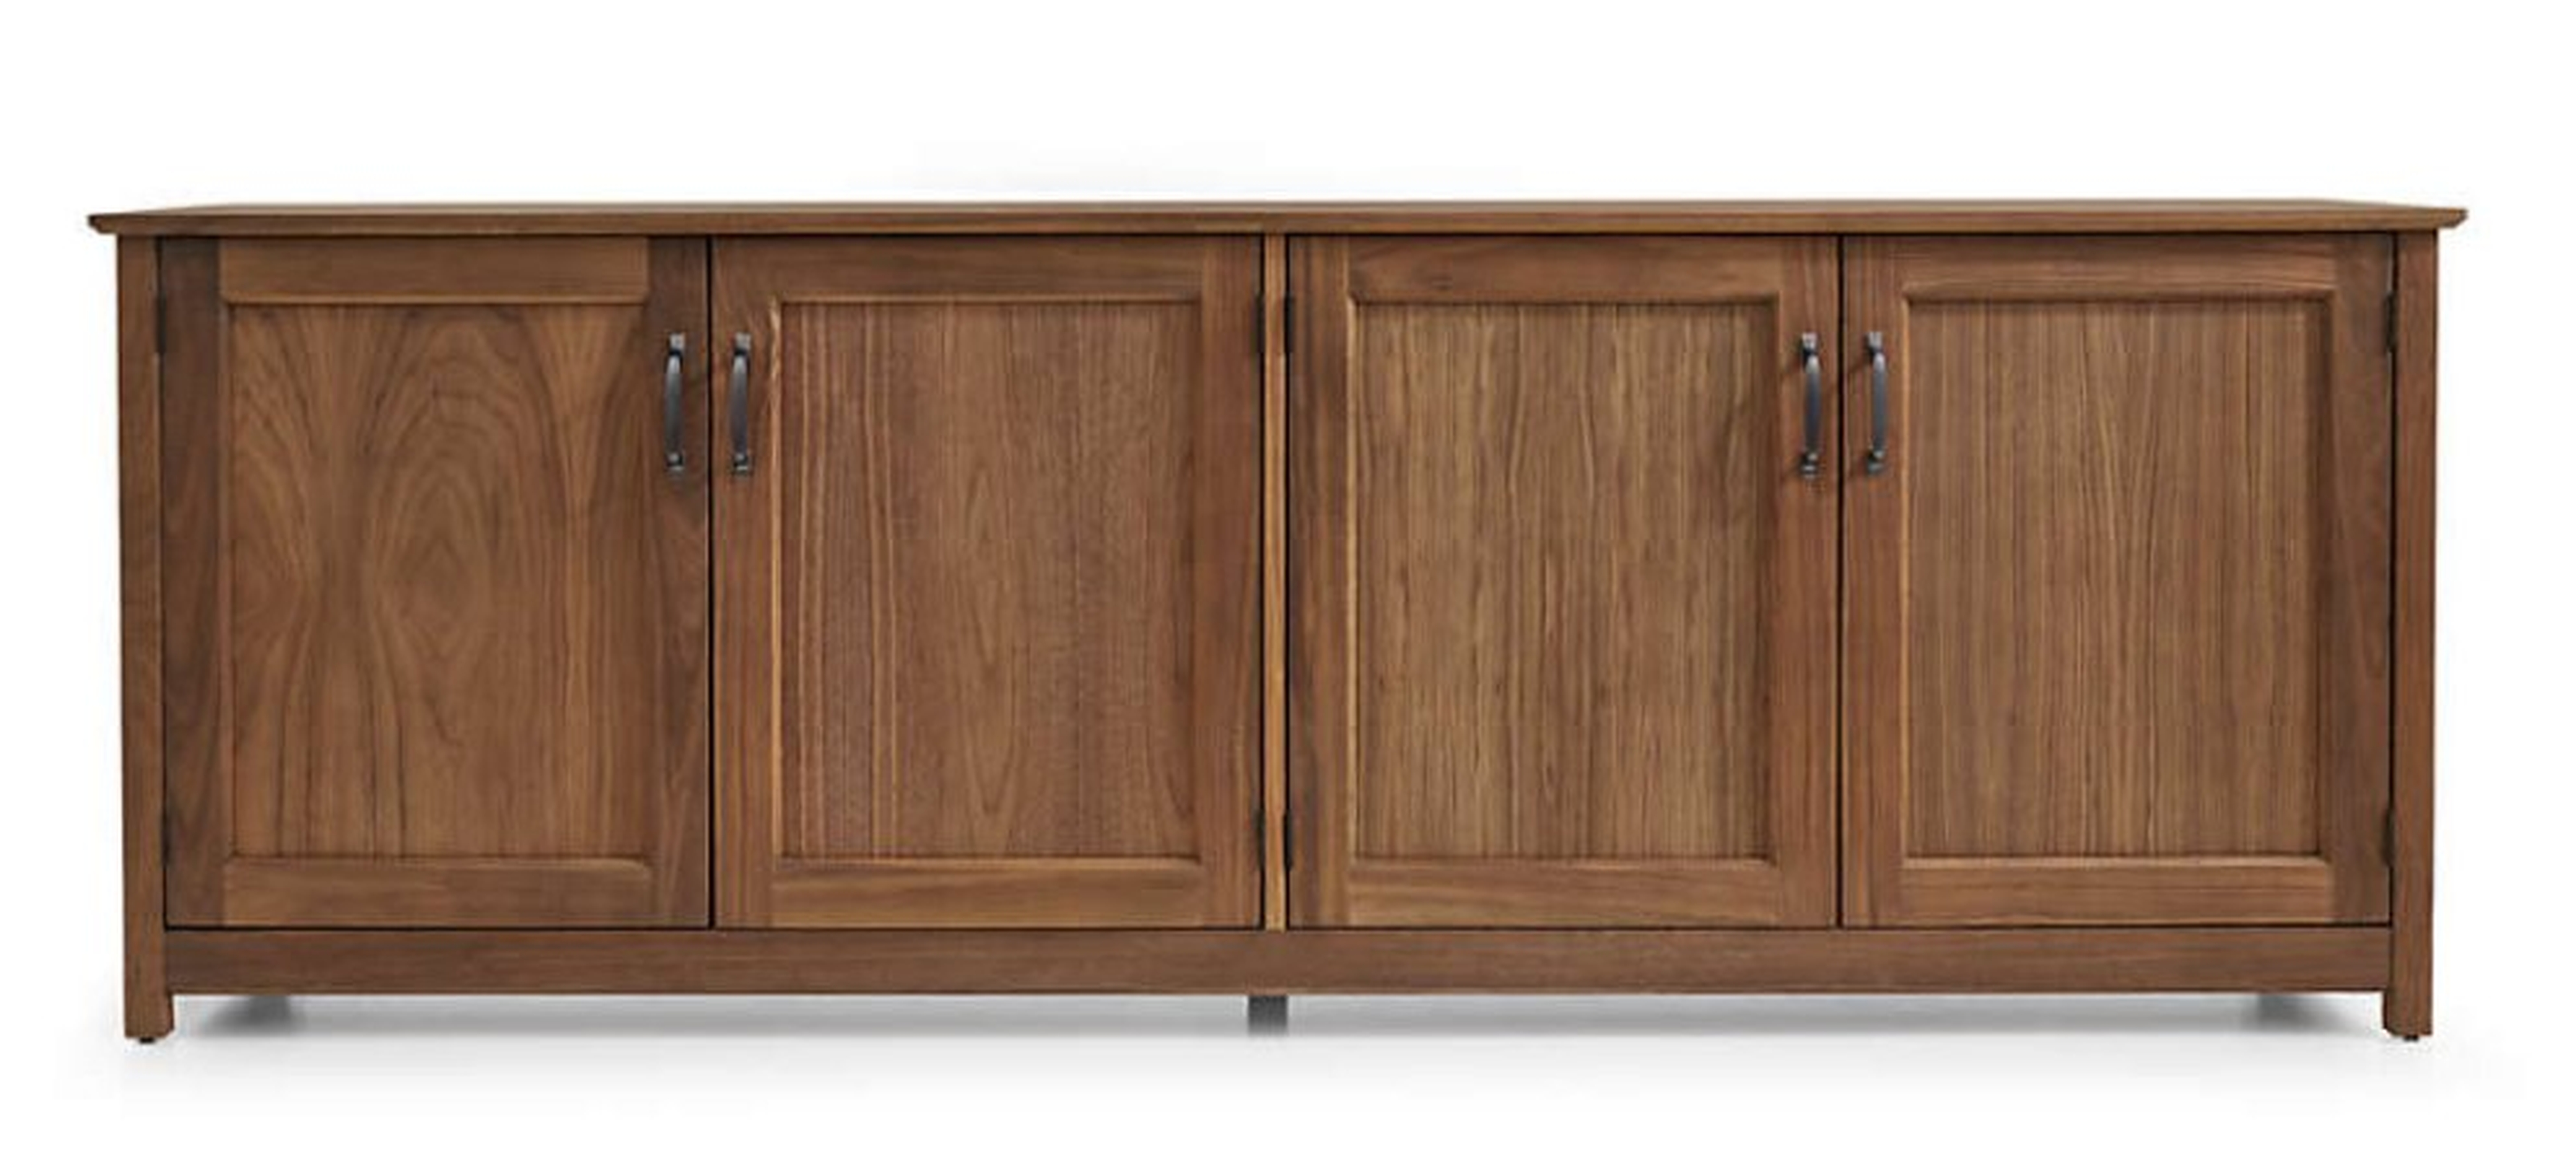 Ainsworth Walnut 85" Media Console with Glass/Wood Doors / Walnut - Crate and Barrel